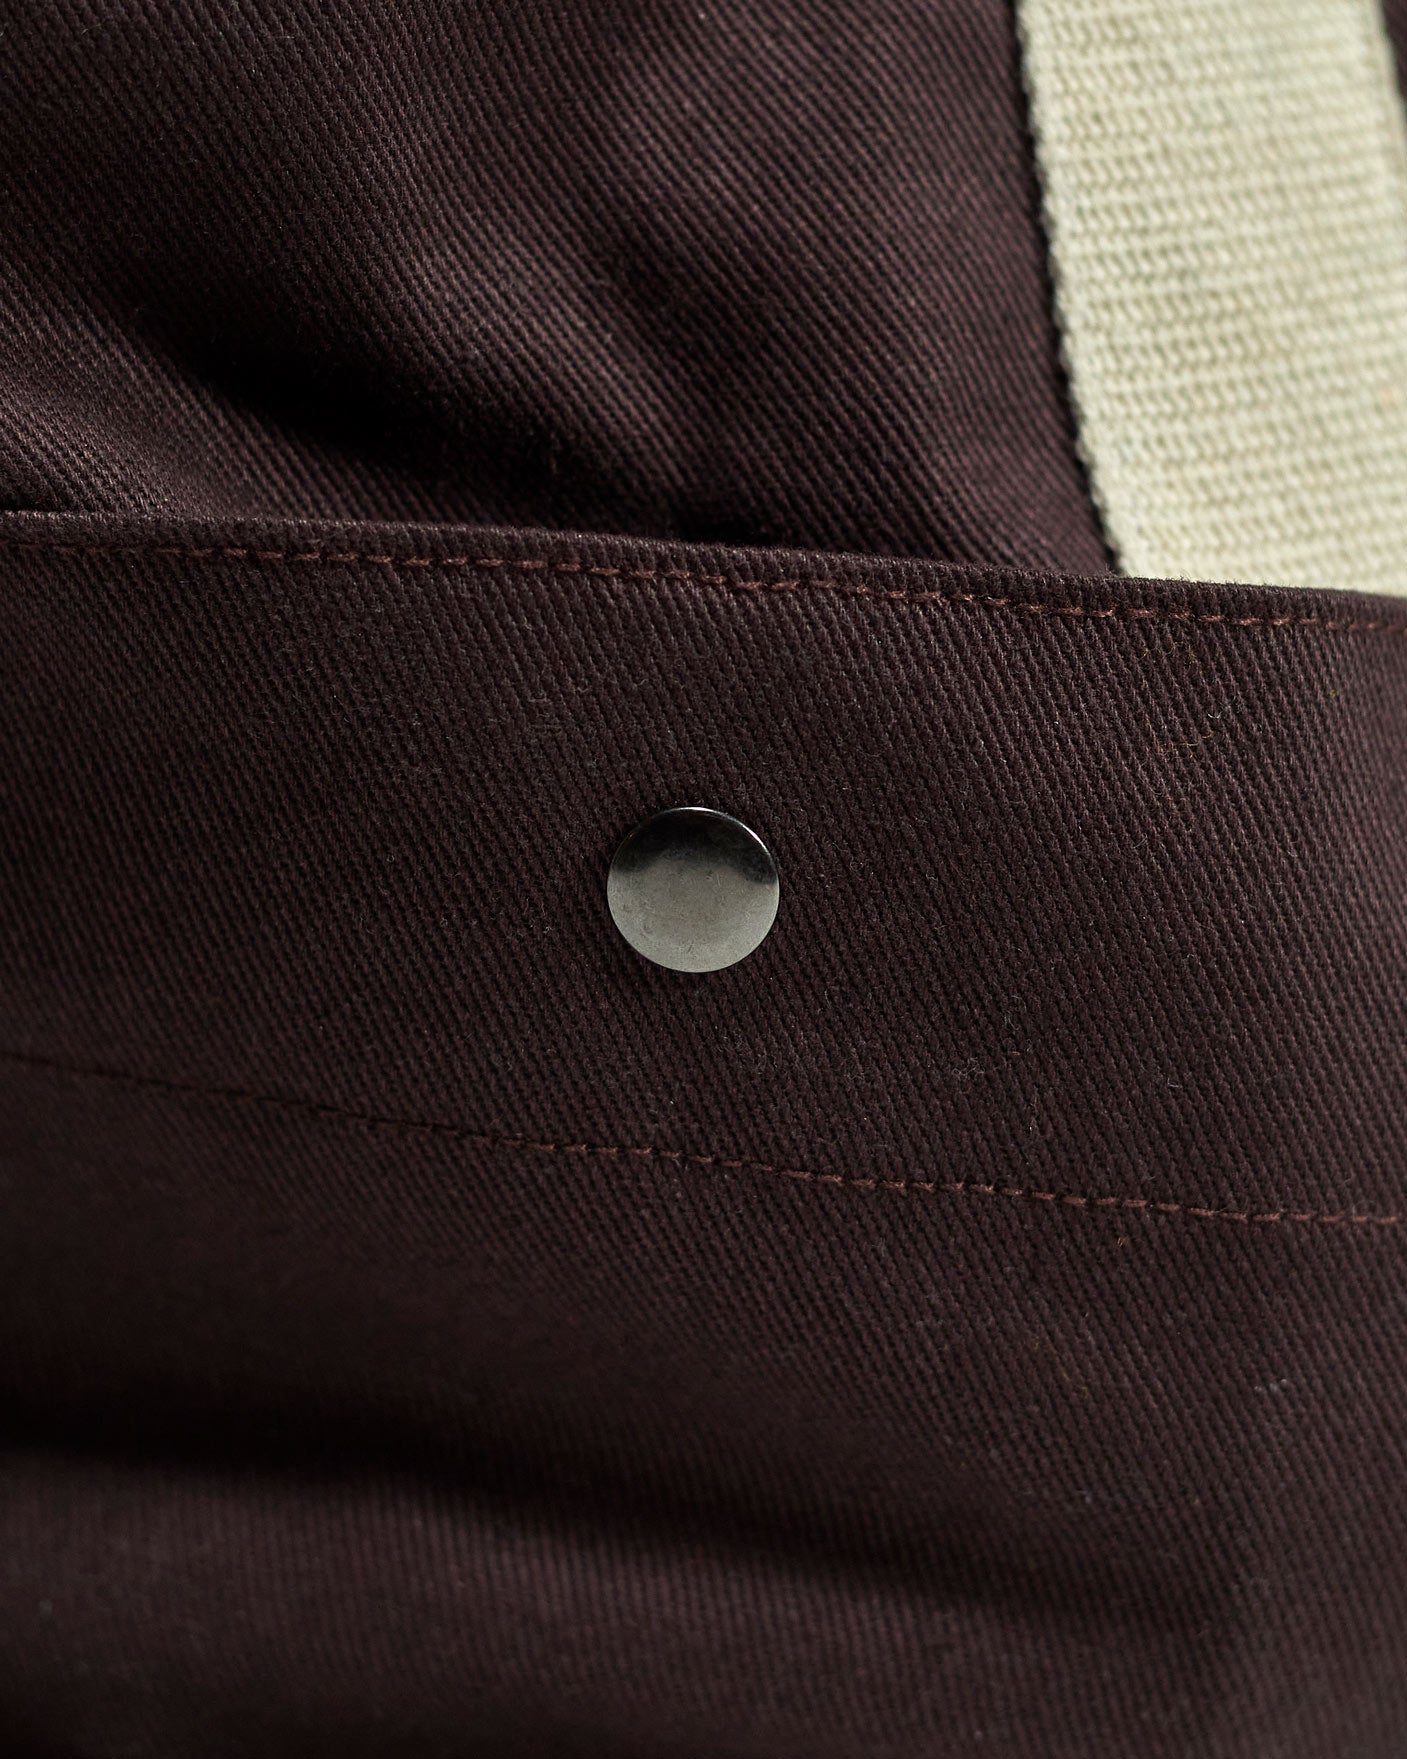 Press-stud fastenings to secure the spacious external pockets of the dark plum Uskees #0401 basin bag in cotton drill.